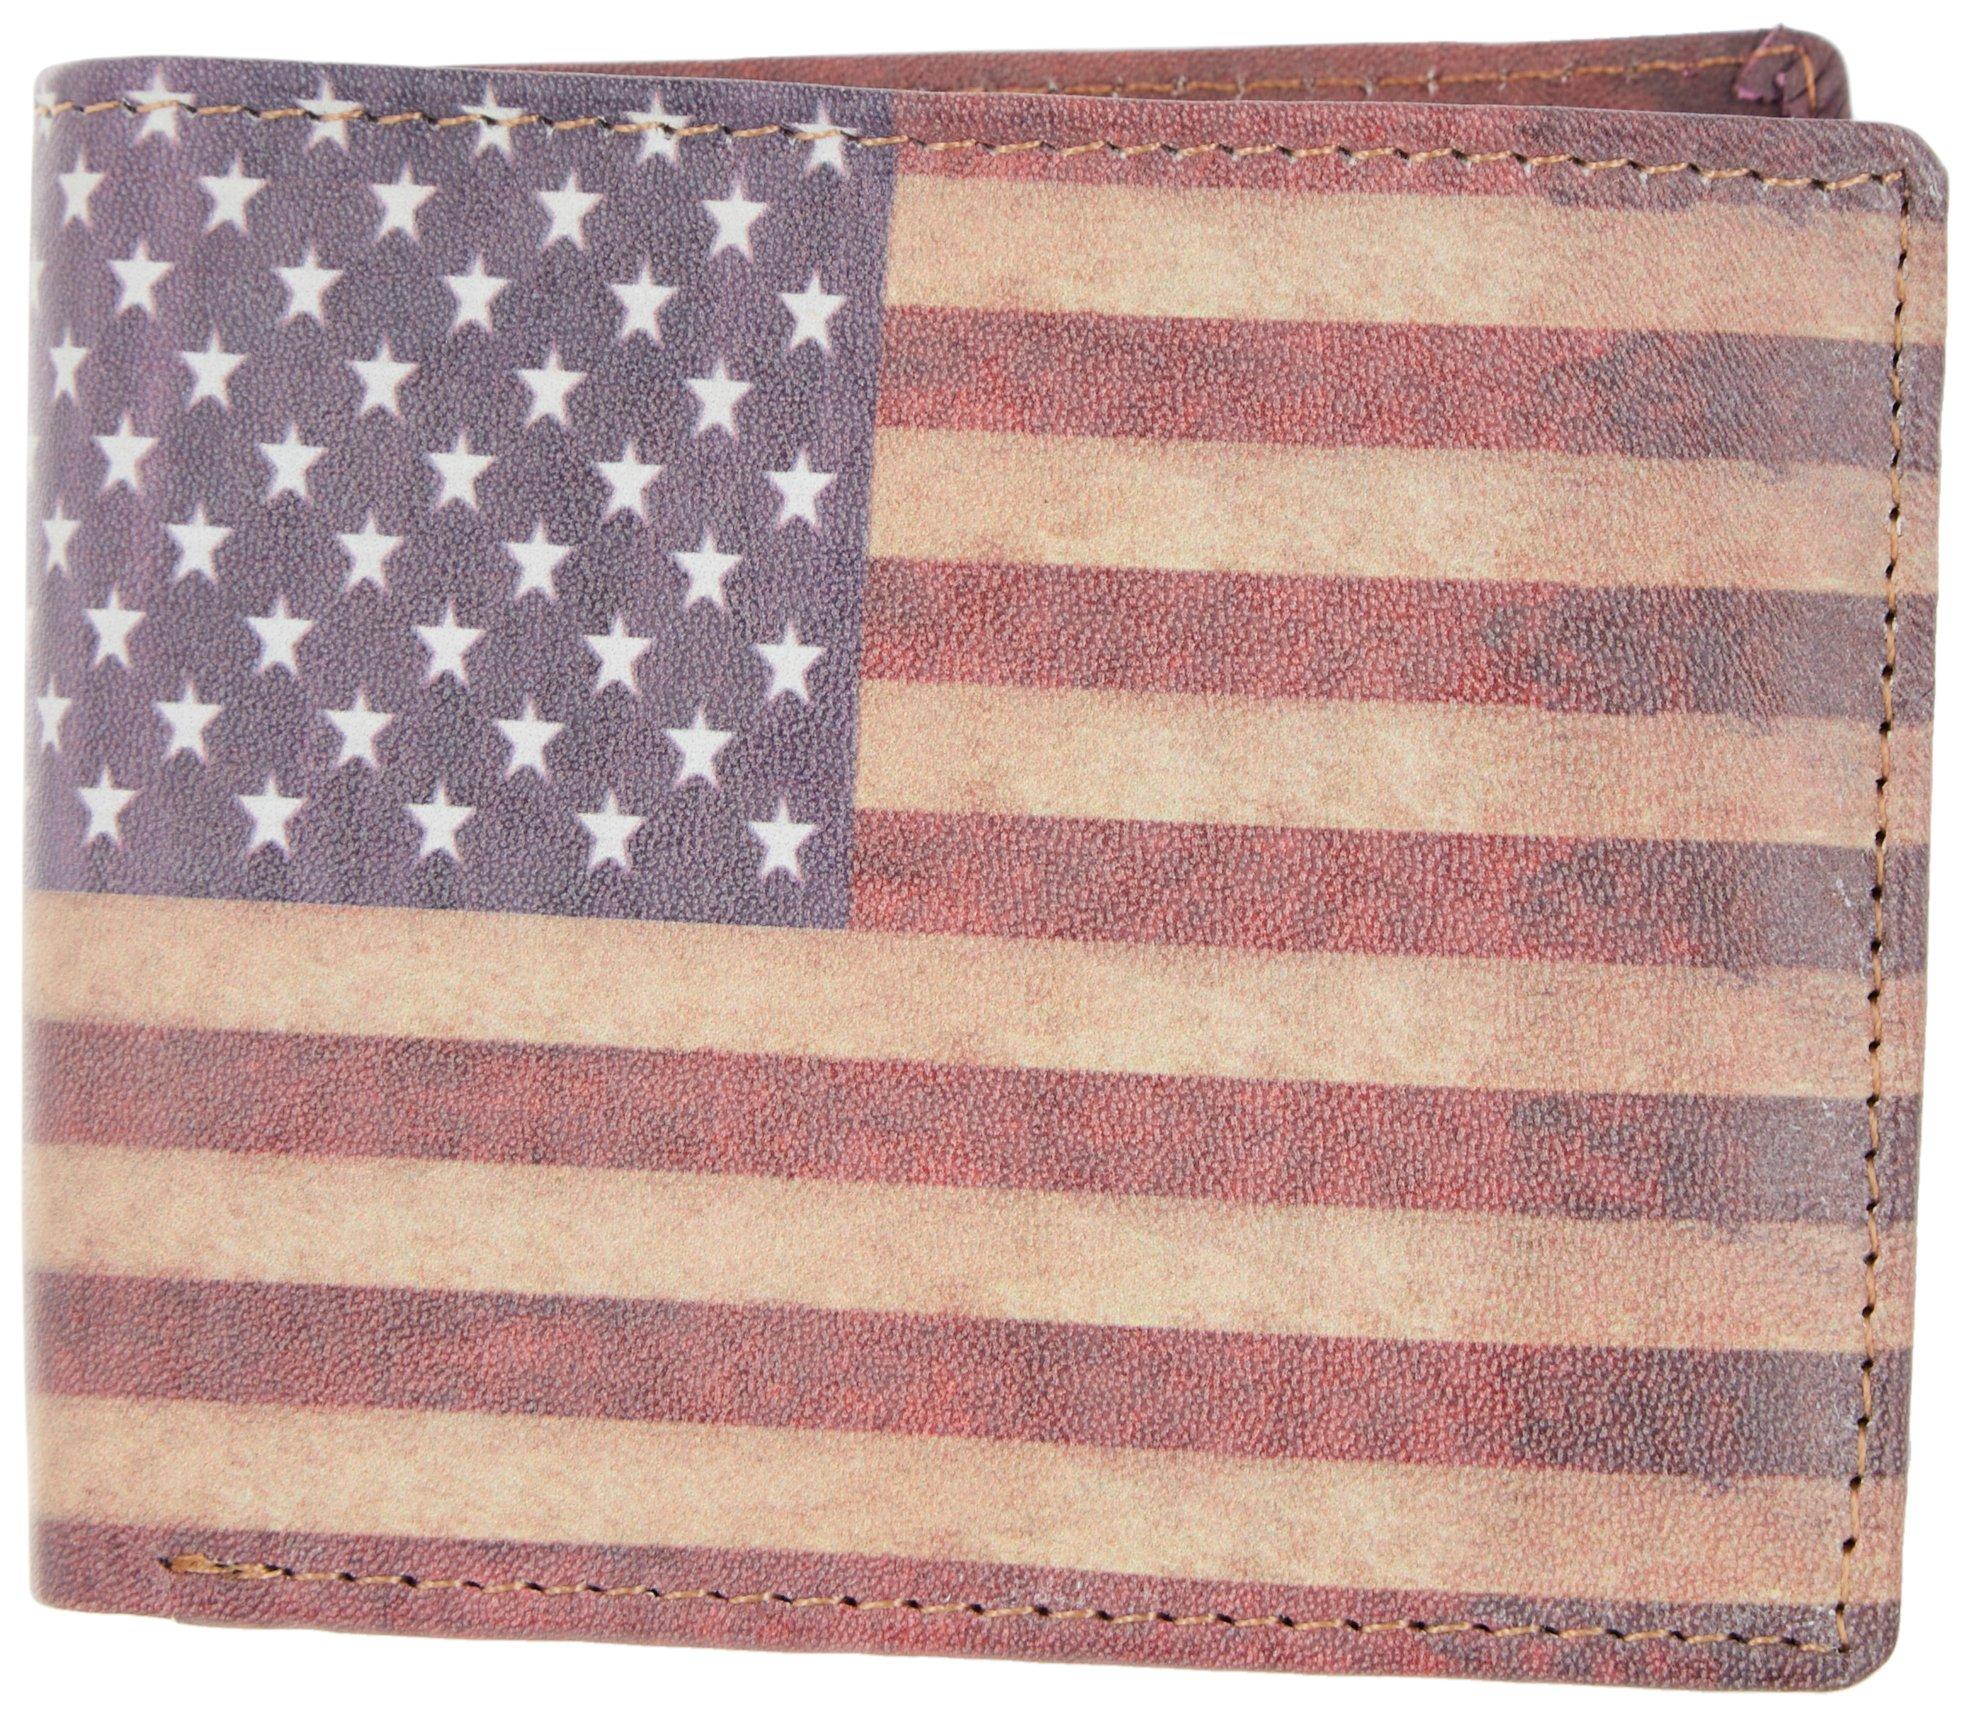 Mens Americana Leather Passcase Wallet